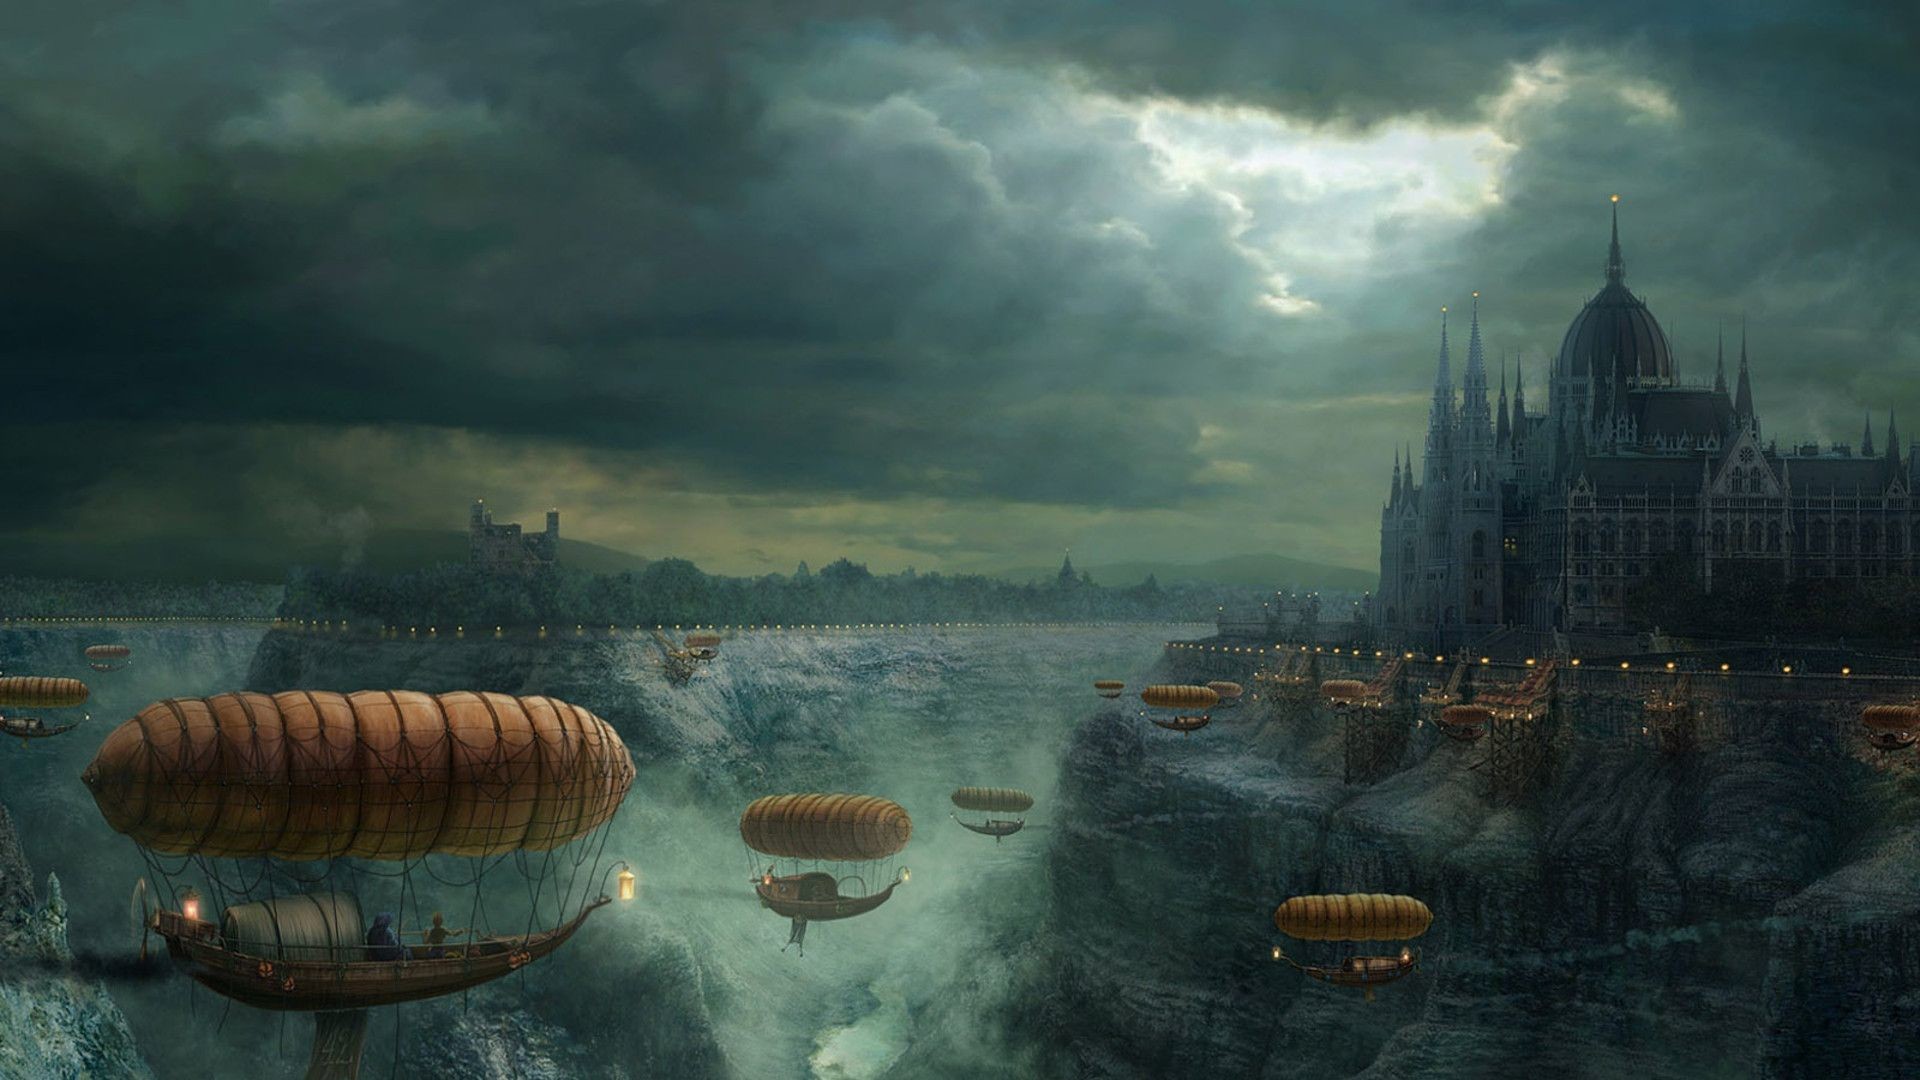 1920x1080 Steampunk Cityscape Wallpapers Photo Just Free Wallpaper High Quality   px 210.74 KB